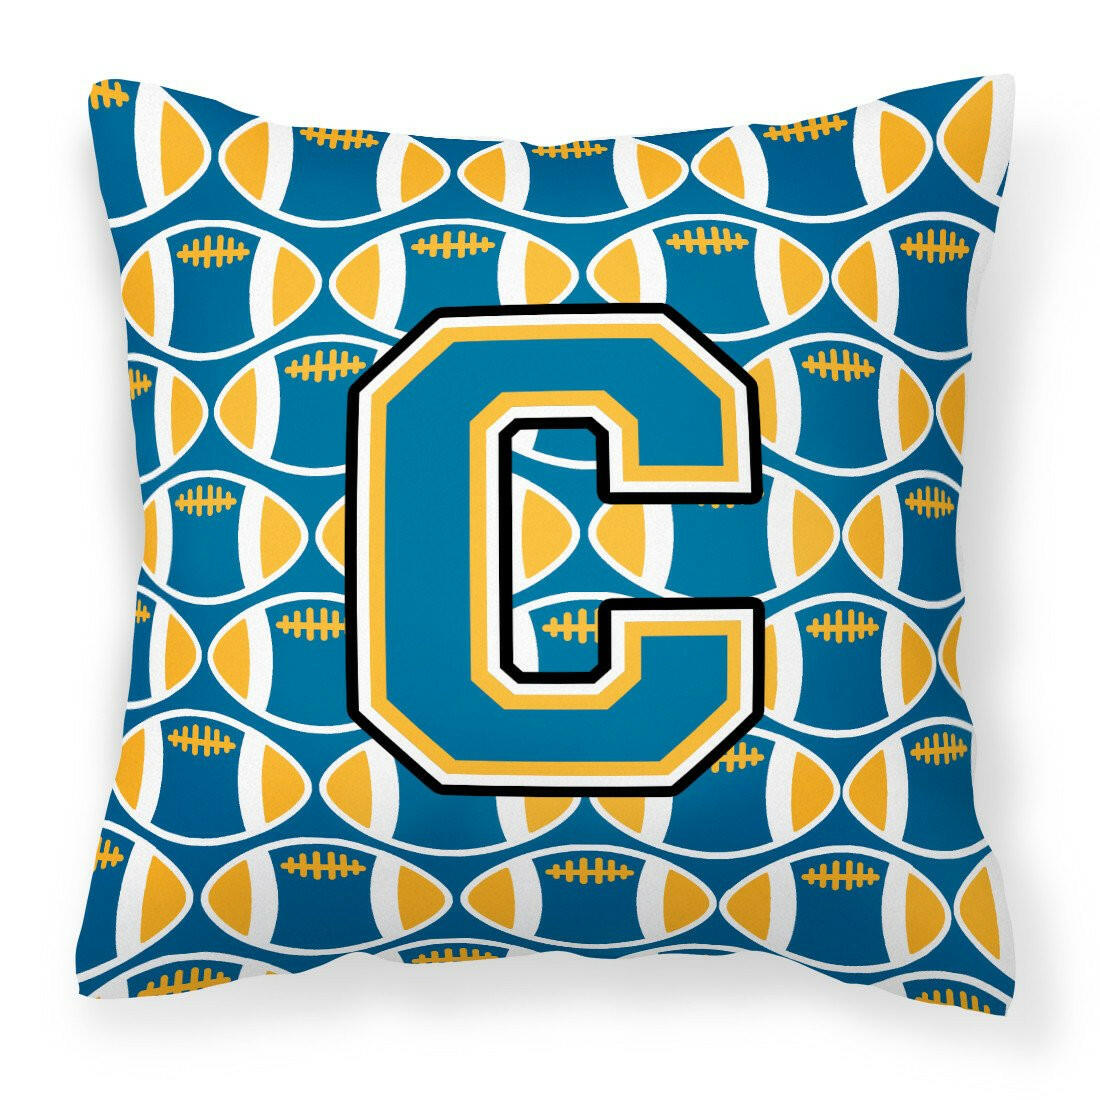 Letter C Football Blue and Gold Fabric Decorative Pillow CJ1077-CPW1414 by Caroline's Treasures